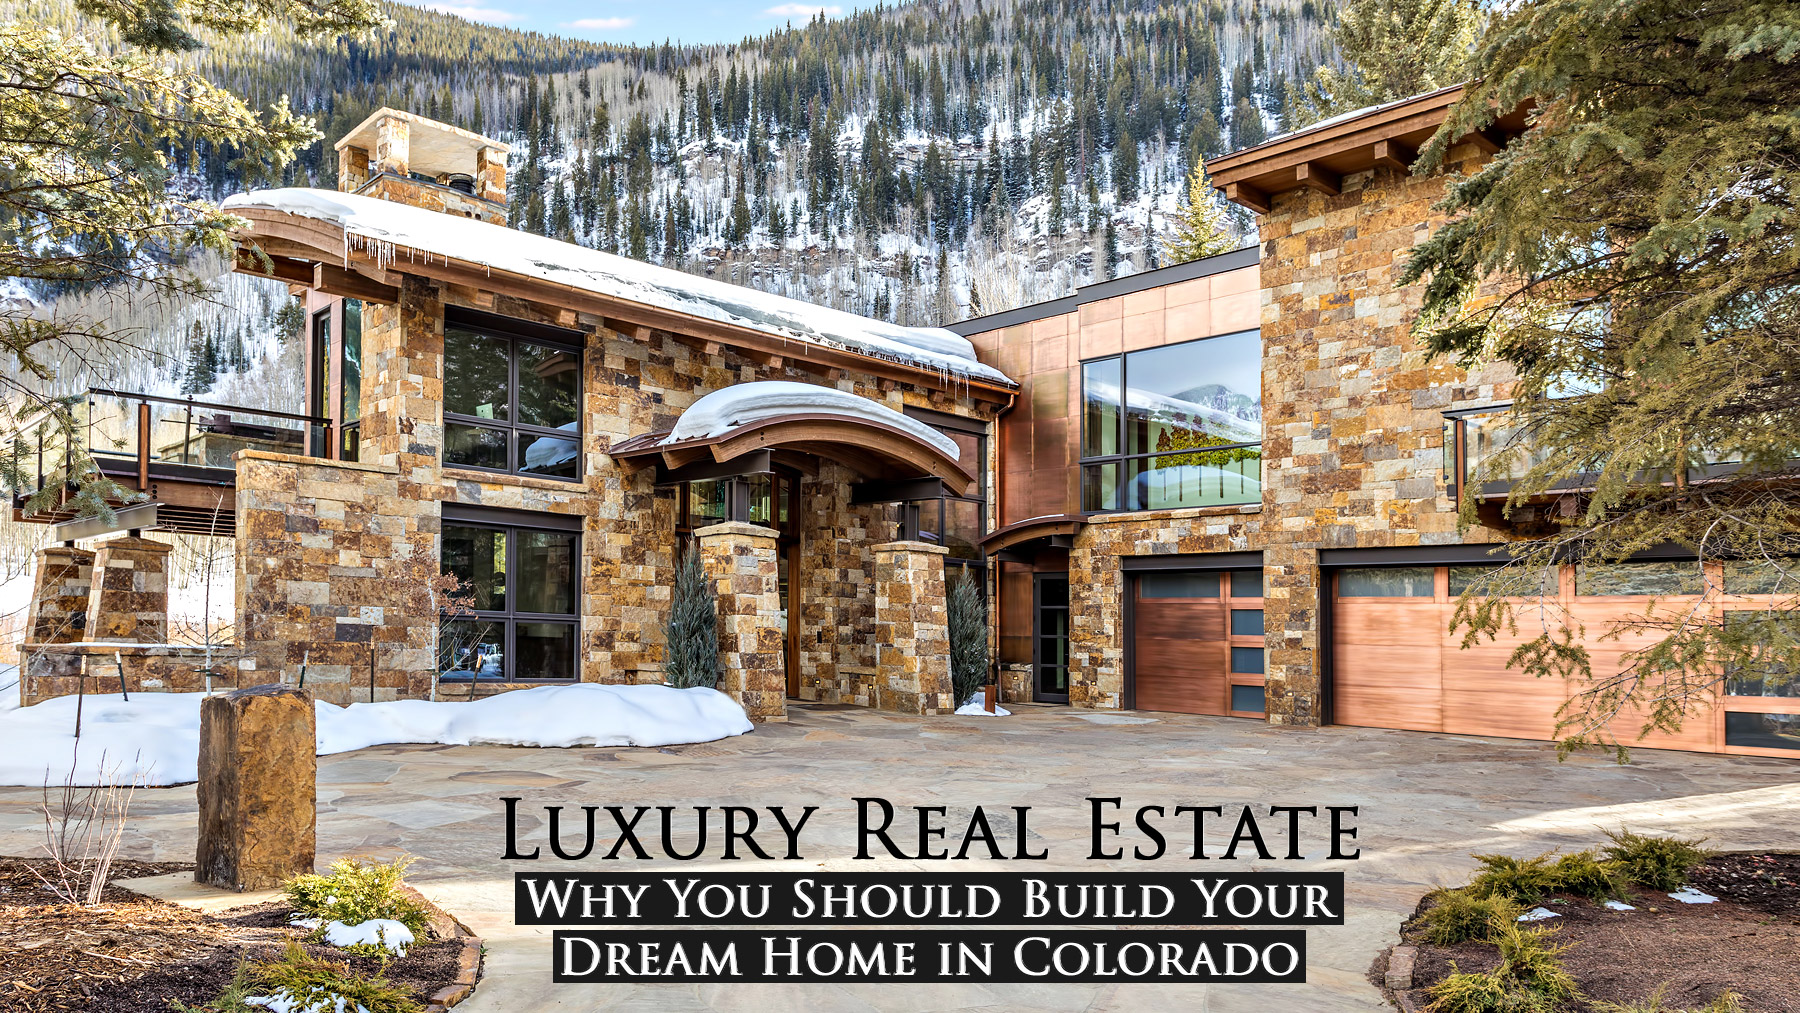 Luxury Real Estate - Why You Should Build Your Dream Home in Colorado